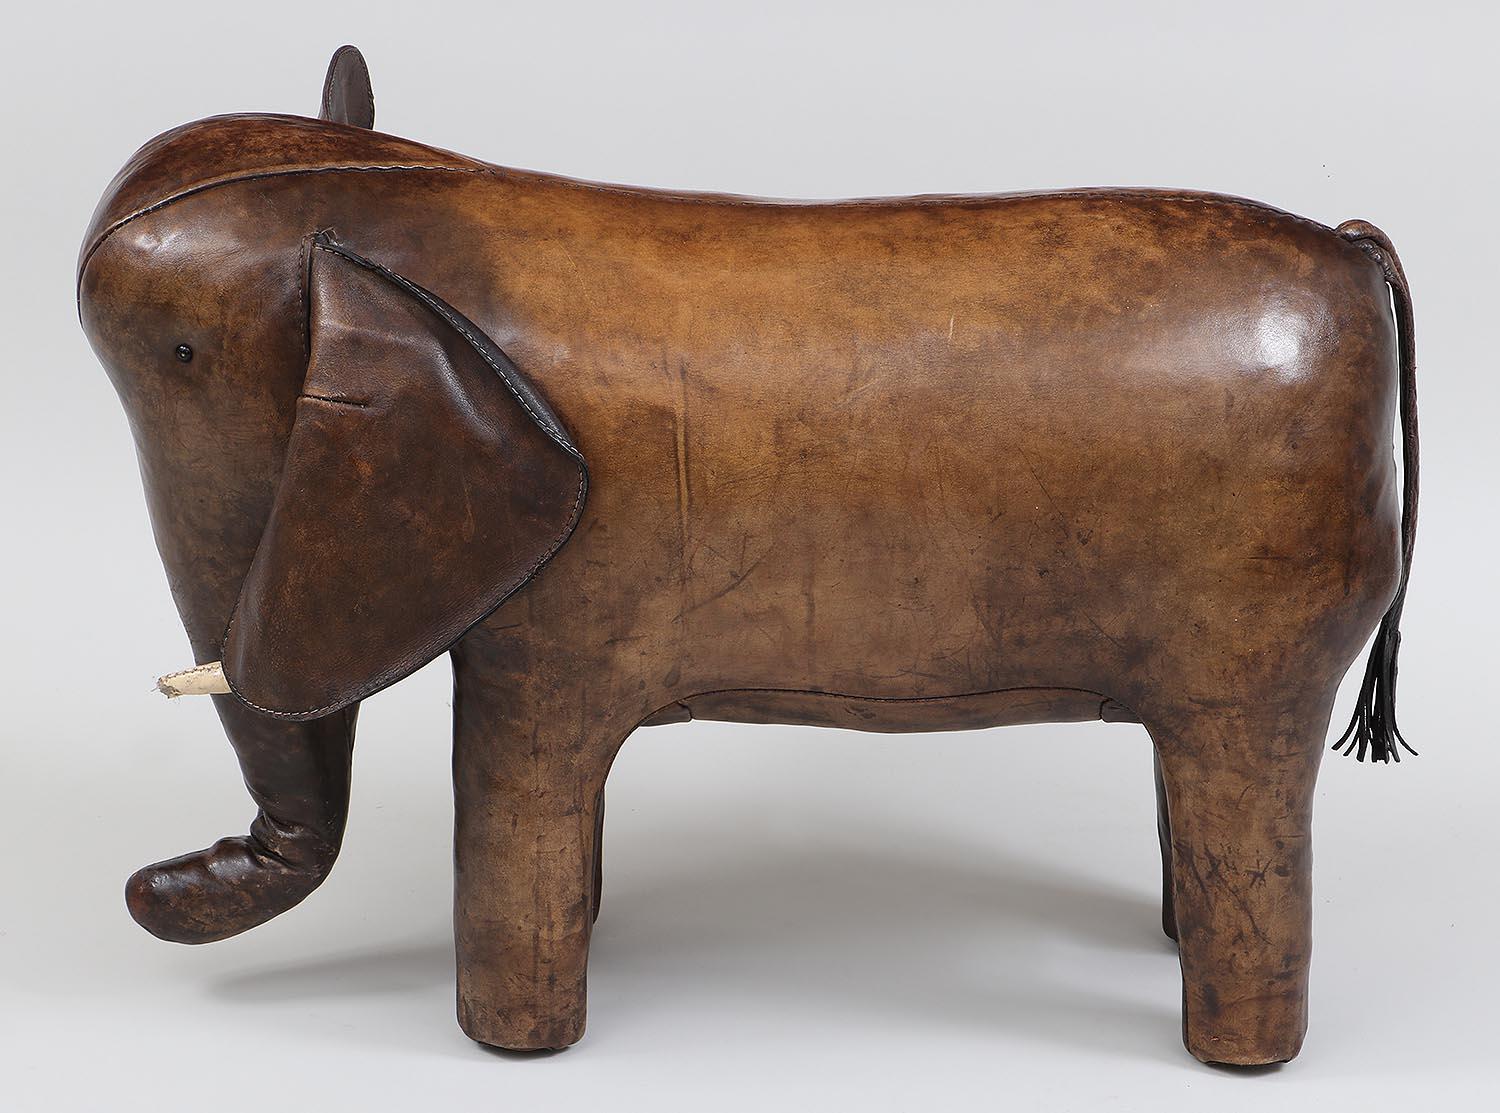 Mid-20th Century Vintage Leather Elephant Footstool, Dimitri Omersa for Abercrombie & Fitch